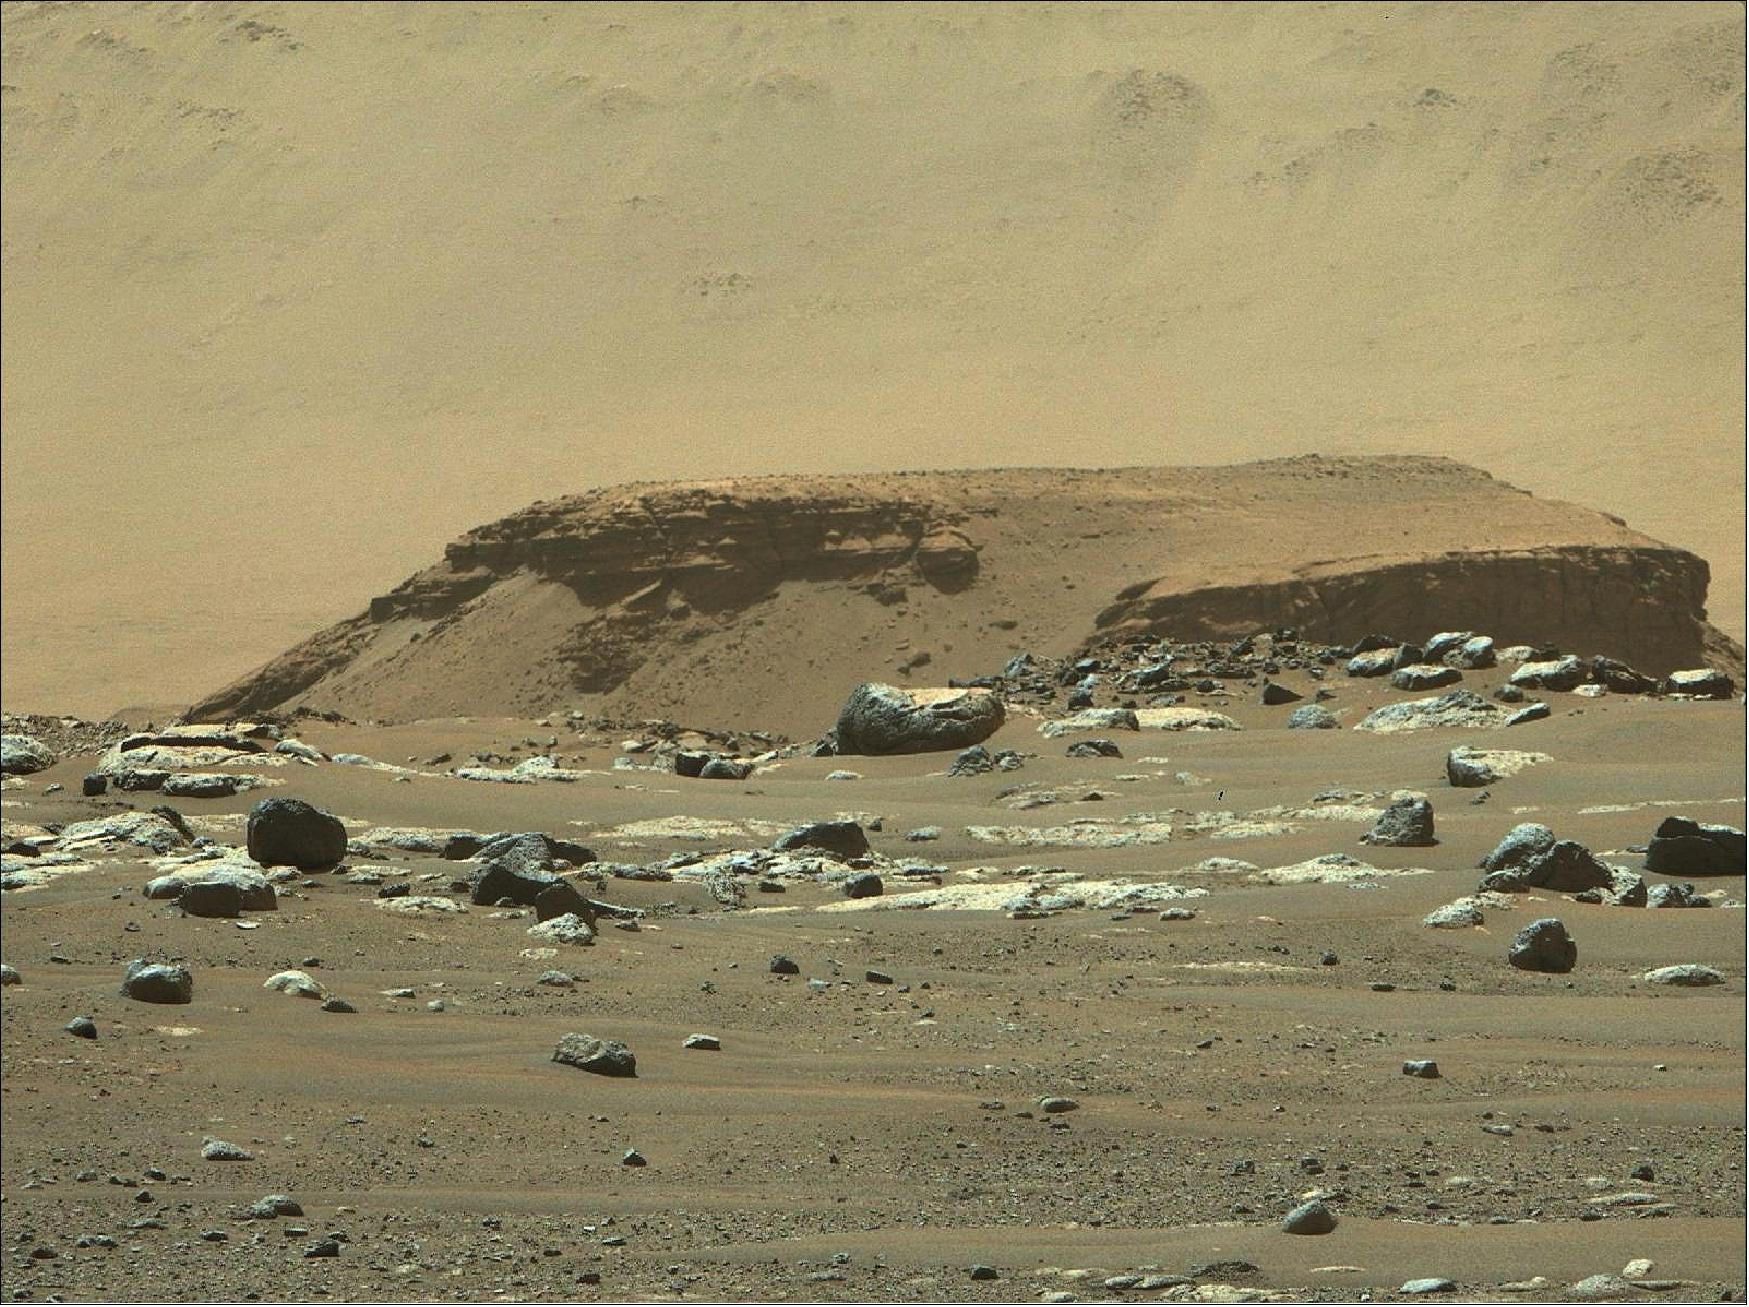 Figure 11: This image of "Kodiak" – one remnant of the fan-shaped deposit of sediments inside Mars' Jezero Crater known as the delta – was taken by Perseverance's Mastcam-Z instrument on Feb. 22, 2021 (image credit: NASA/JPL-Caltech/ASU/MSSS)